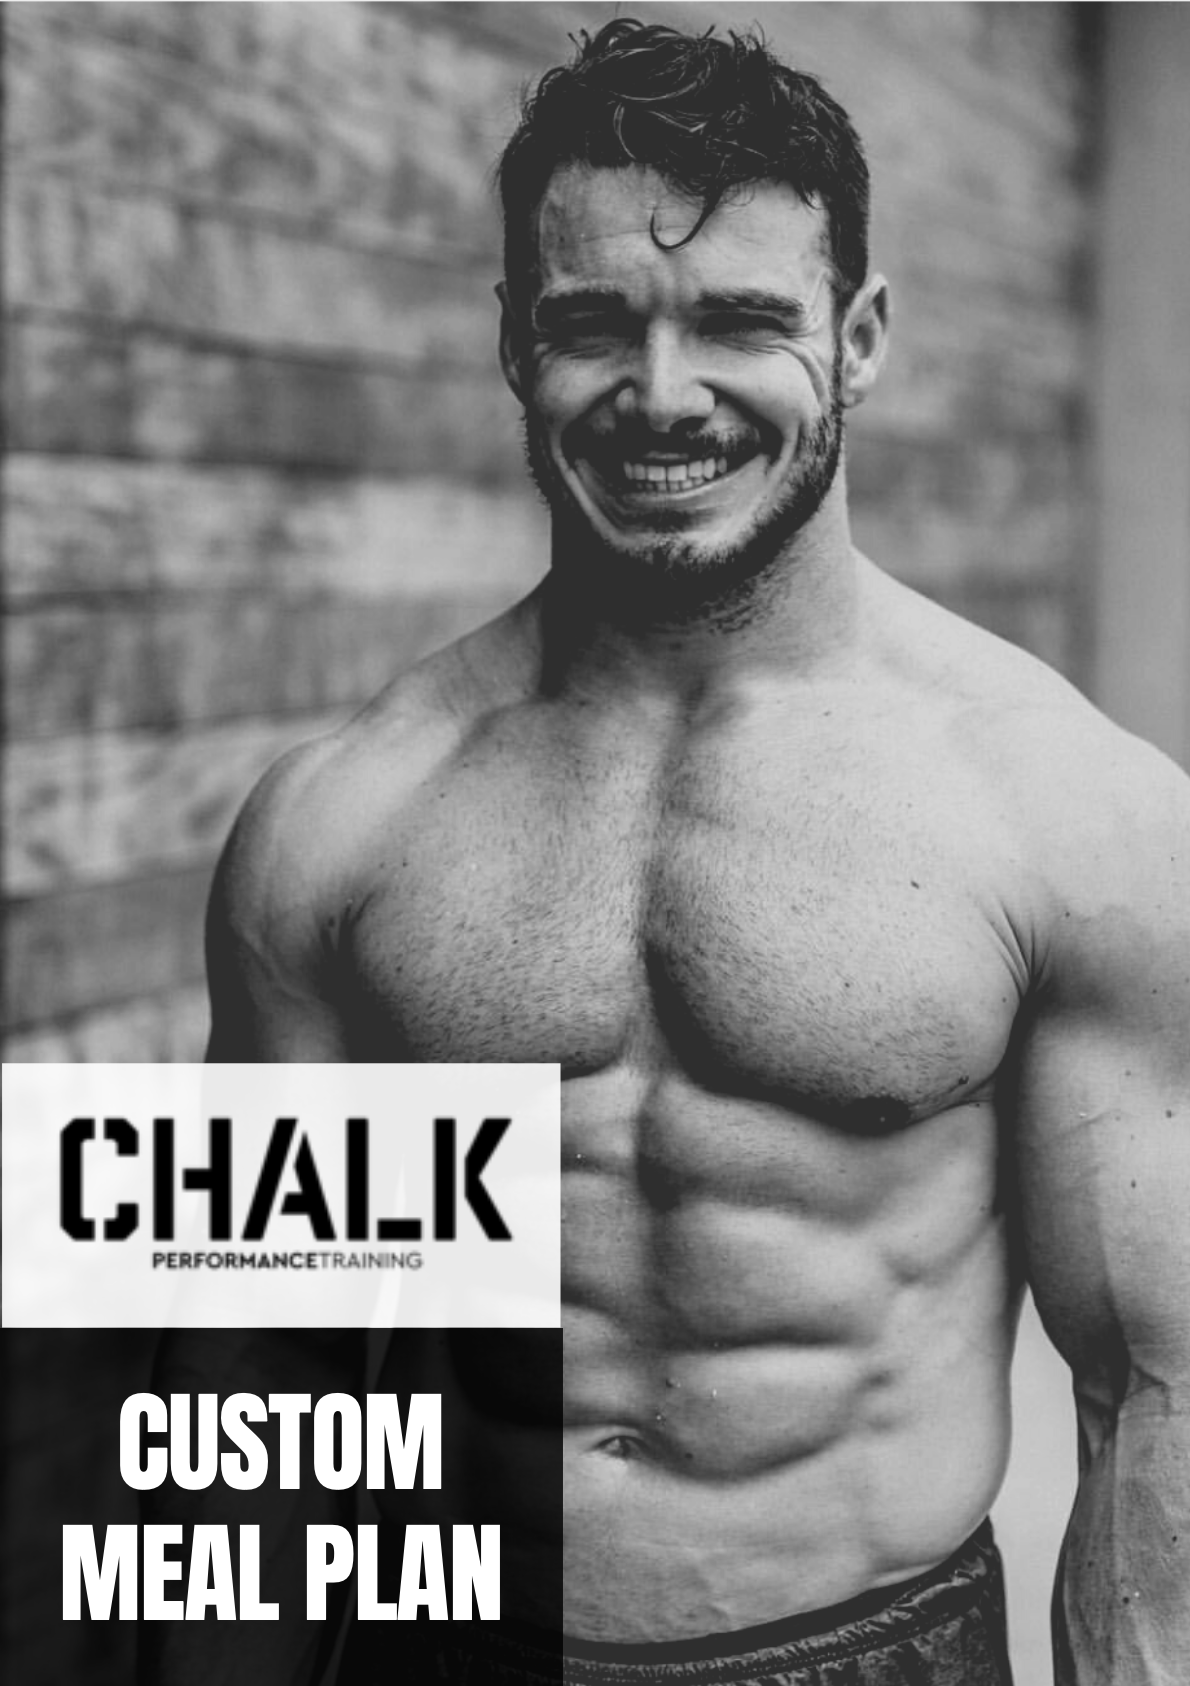 Find Custom and Top Quality Buy Gym Chalk for All 